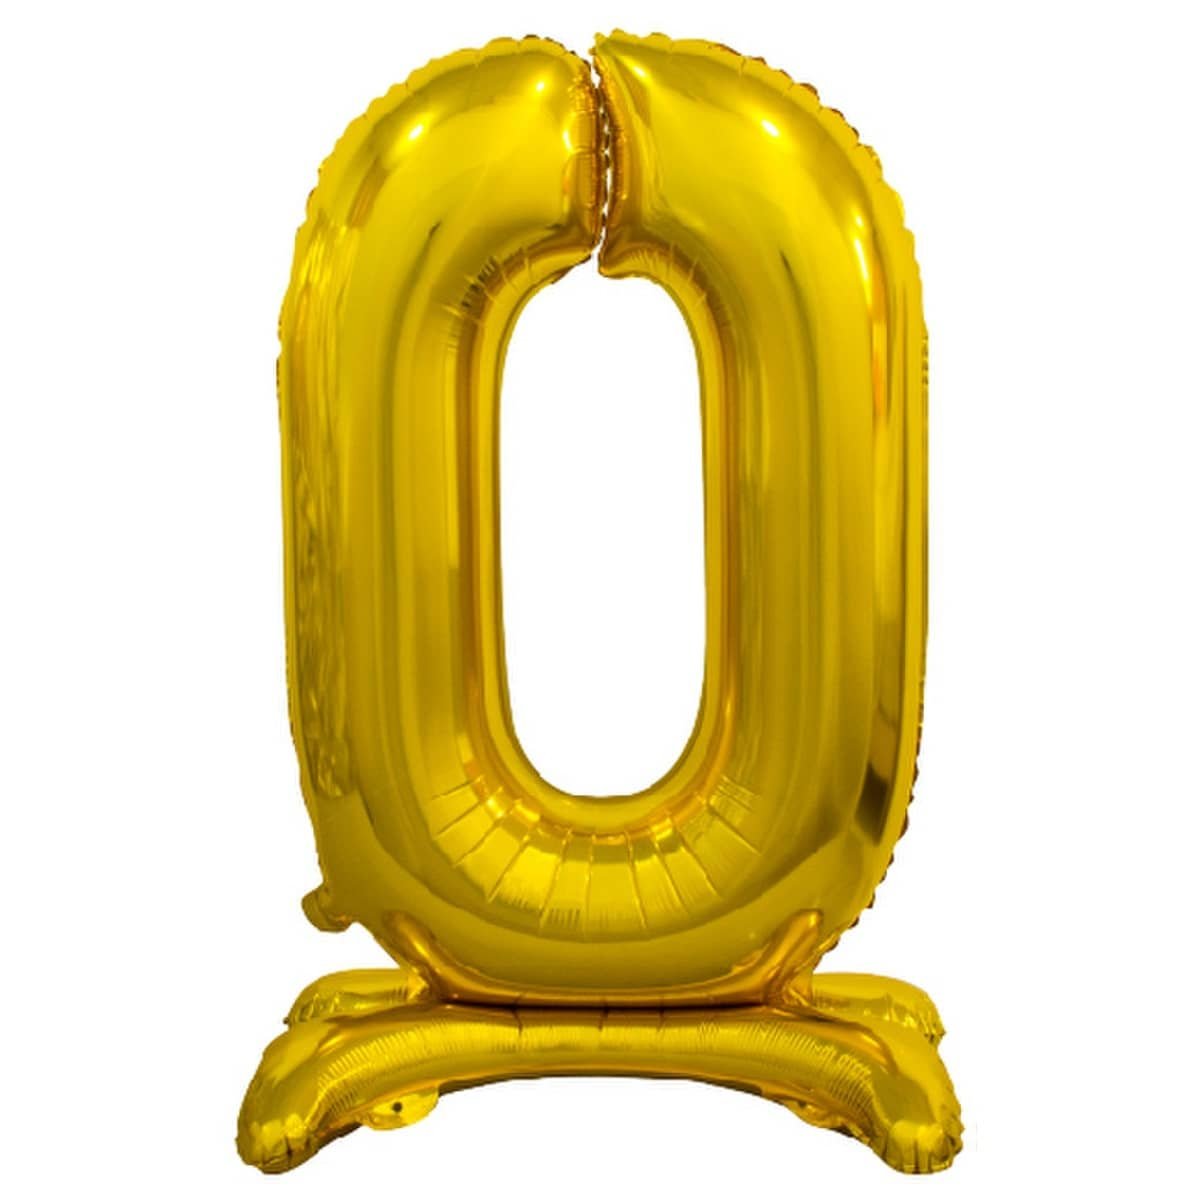 Gold "0" Giant Standing Air Filled Numeral Foil Balloon 76CM (30") - Party Owls